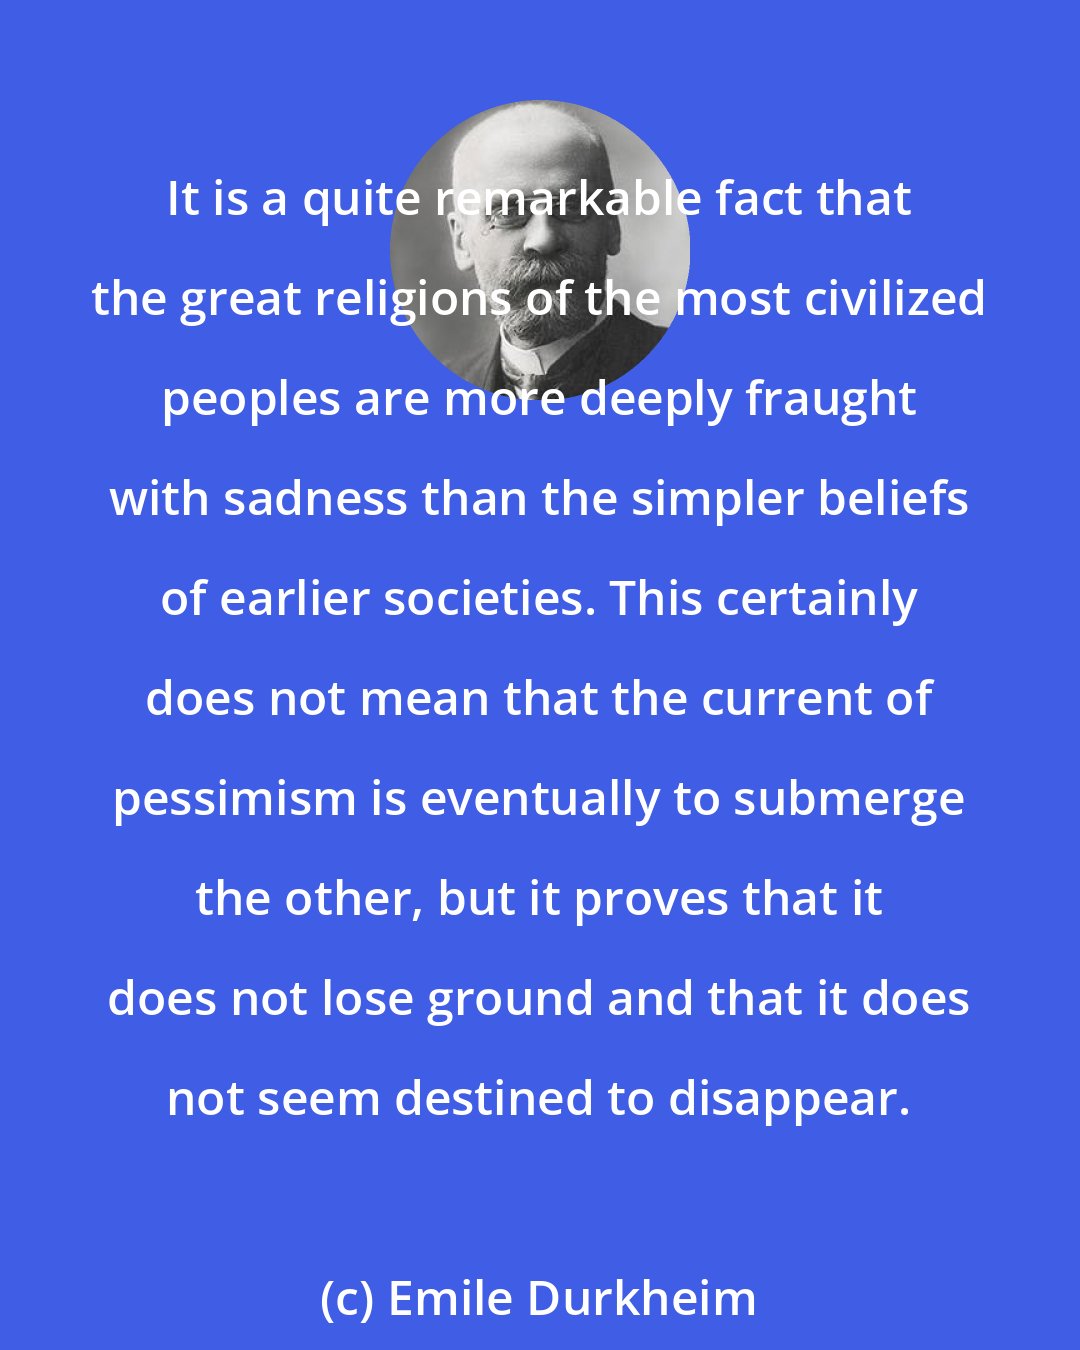 Emile Durkheim: It is a quite remarkable fact that the great religions of the most civilized peoples are more deeply fraught with sadness than the simpler beliefs of earlier societies. This certainly does not mean that the current of pessimism is eventually to submerge the other, but it proves that it does not lose ground and that it does not seem destined to disappear.